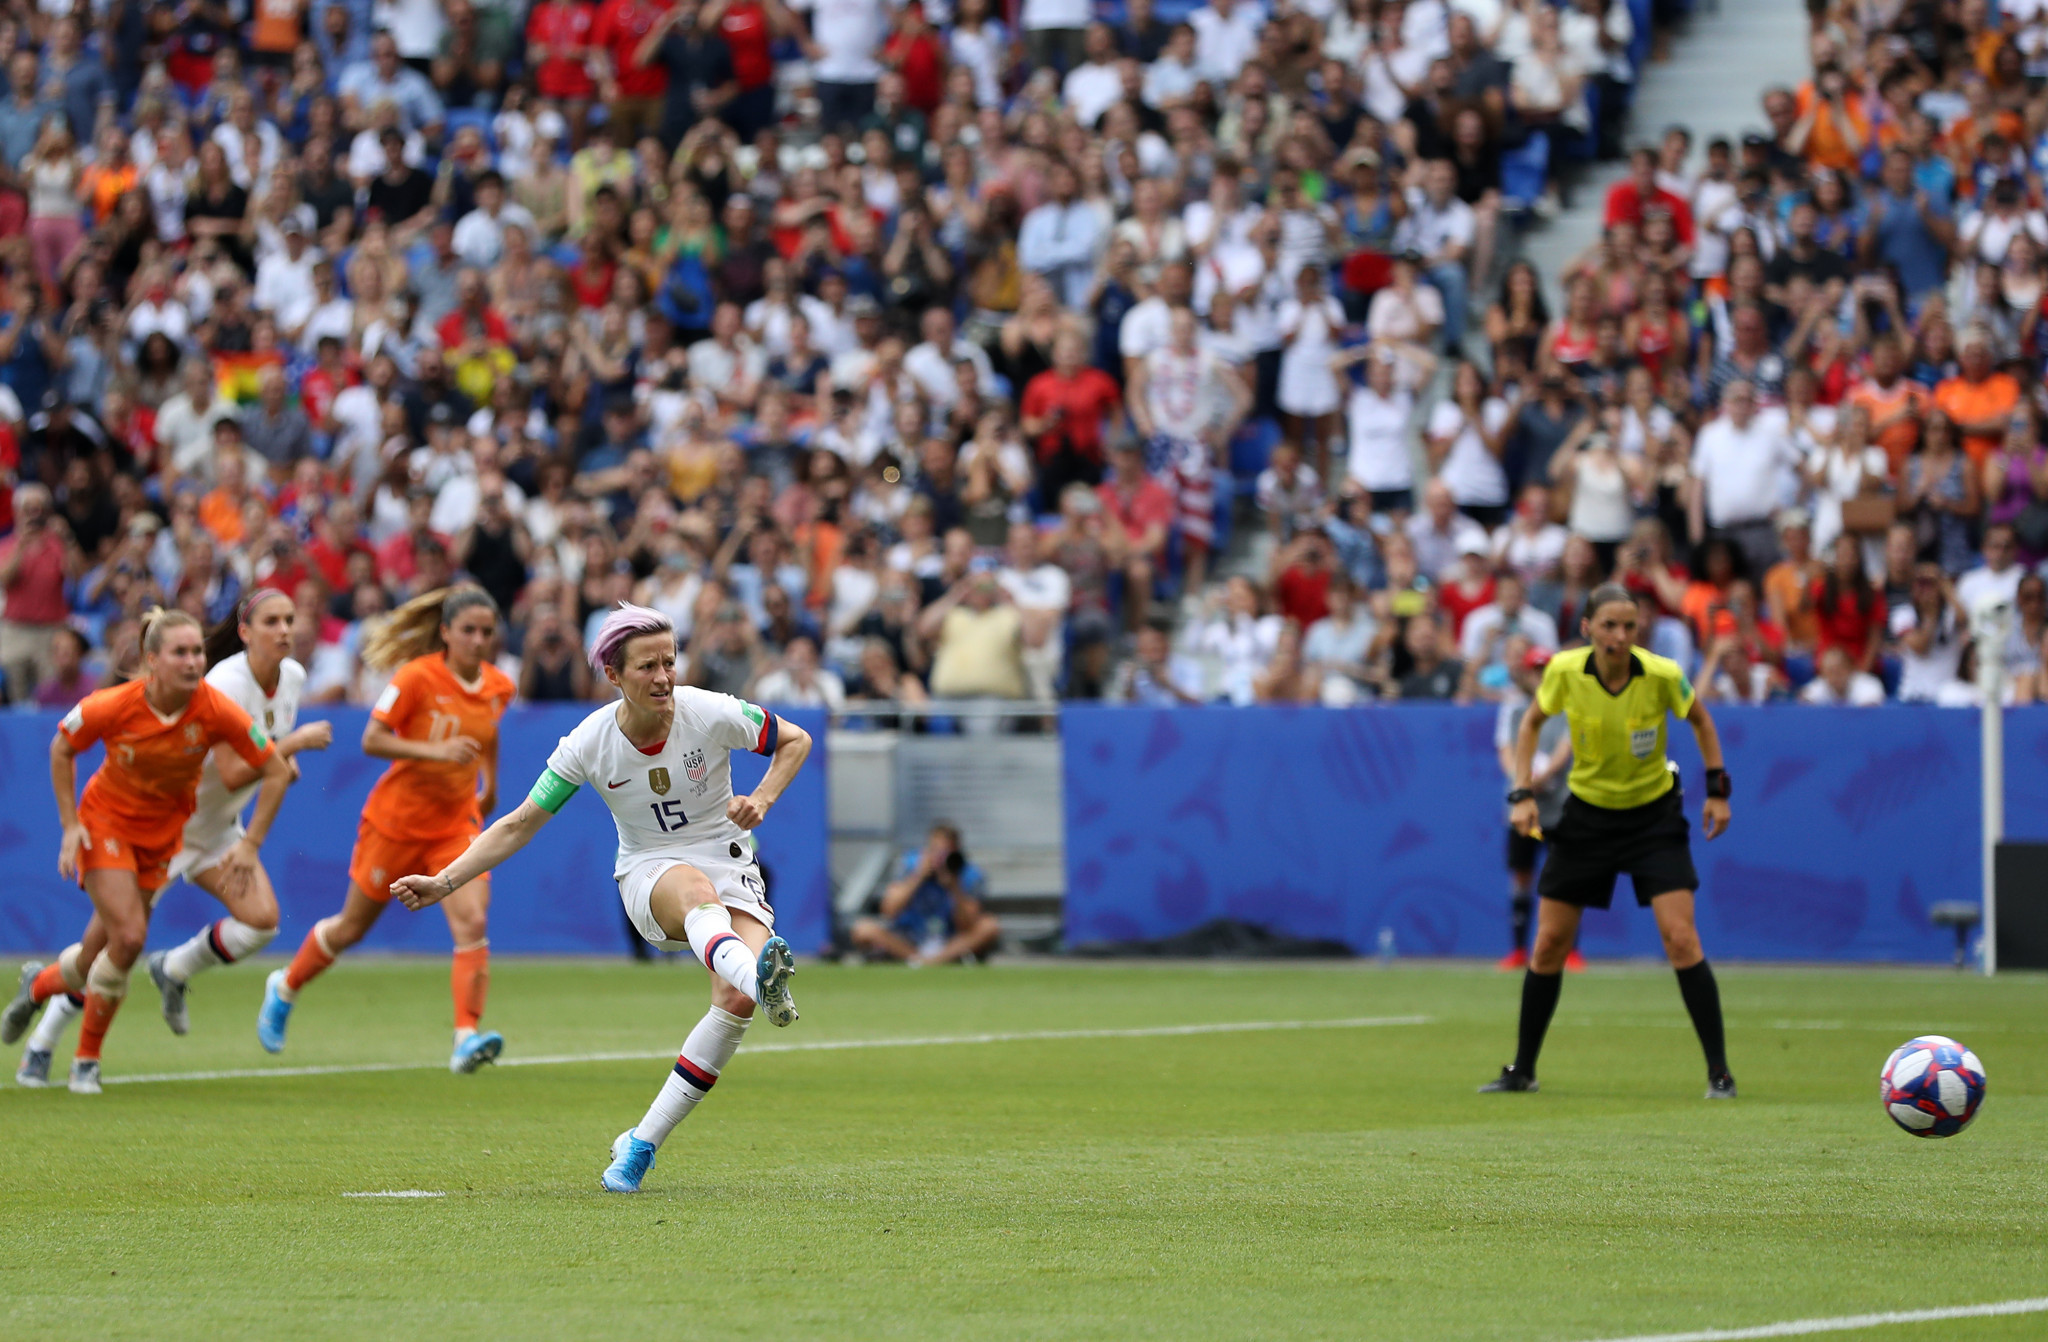 Megan Rapinoe stepped up to score from the spot to give the US the lead ©Getty Images